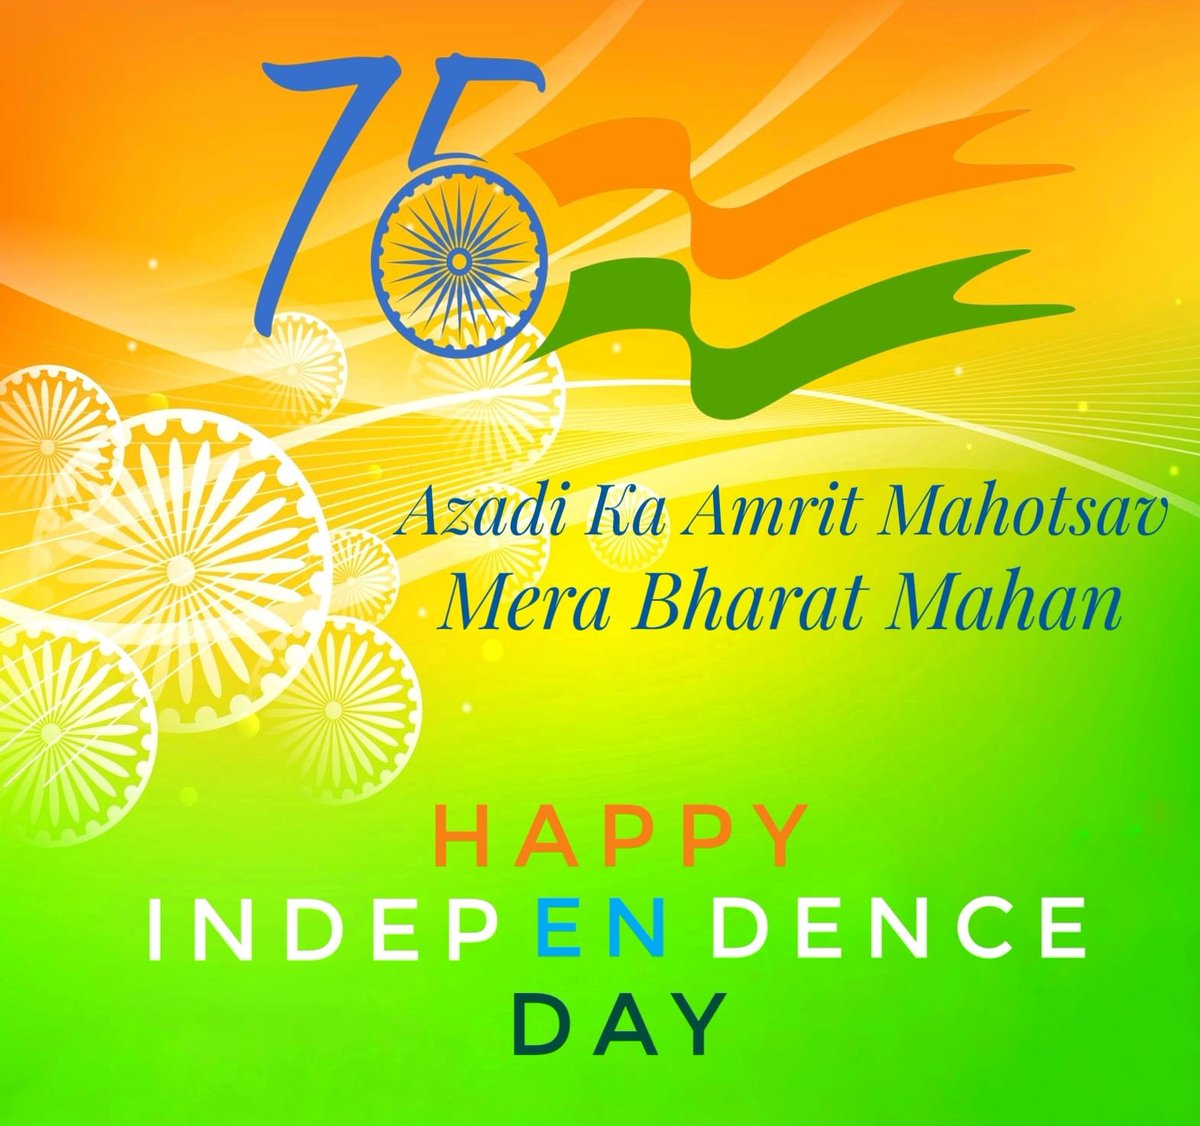 As we mark the end of our 75 years of glorious freedom and celebrate our 76th Independence Day, let us dedicate ourselves to make India great, atmanirbhar and achieve PMs Panchpran for Amrit Kal - India@100... 'Happy Independence Day' and wish you all a glorious and safe future.